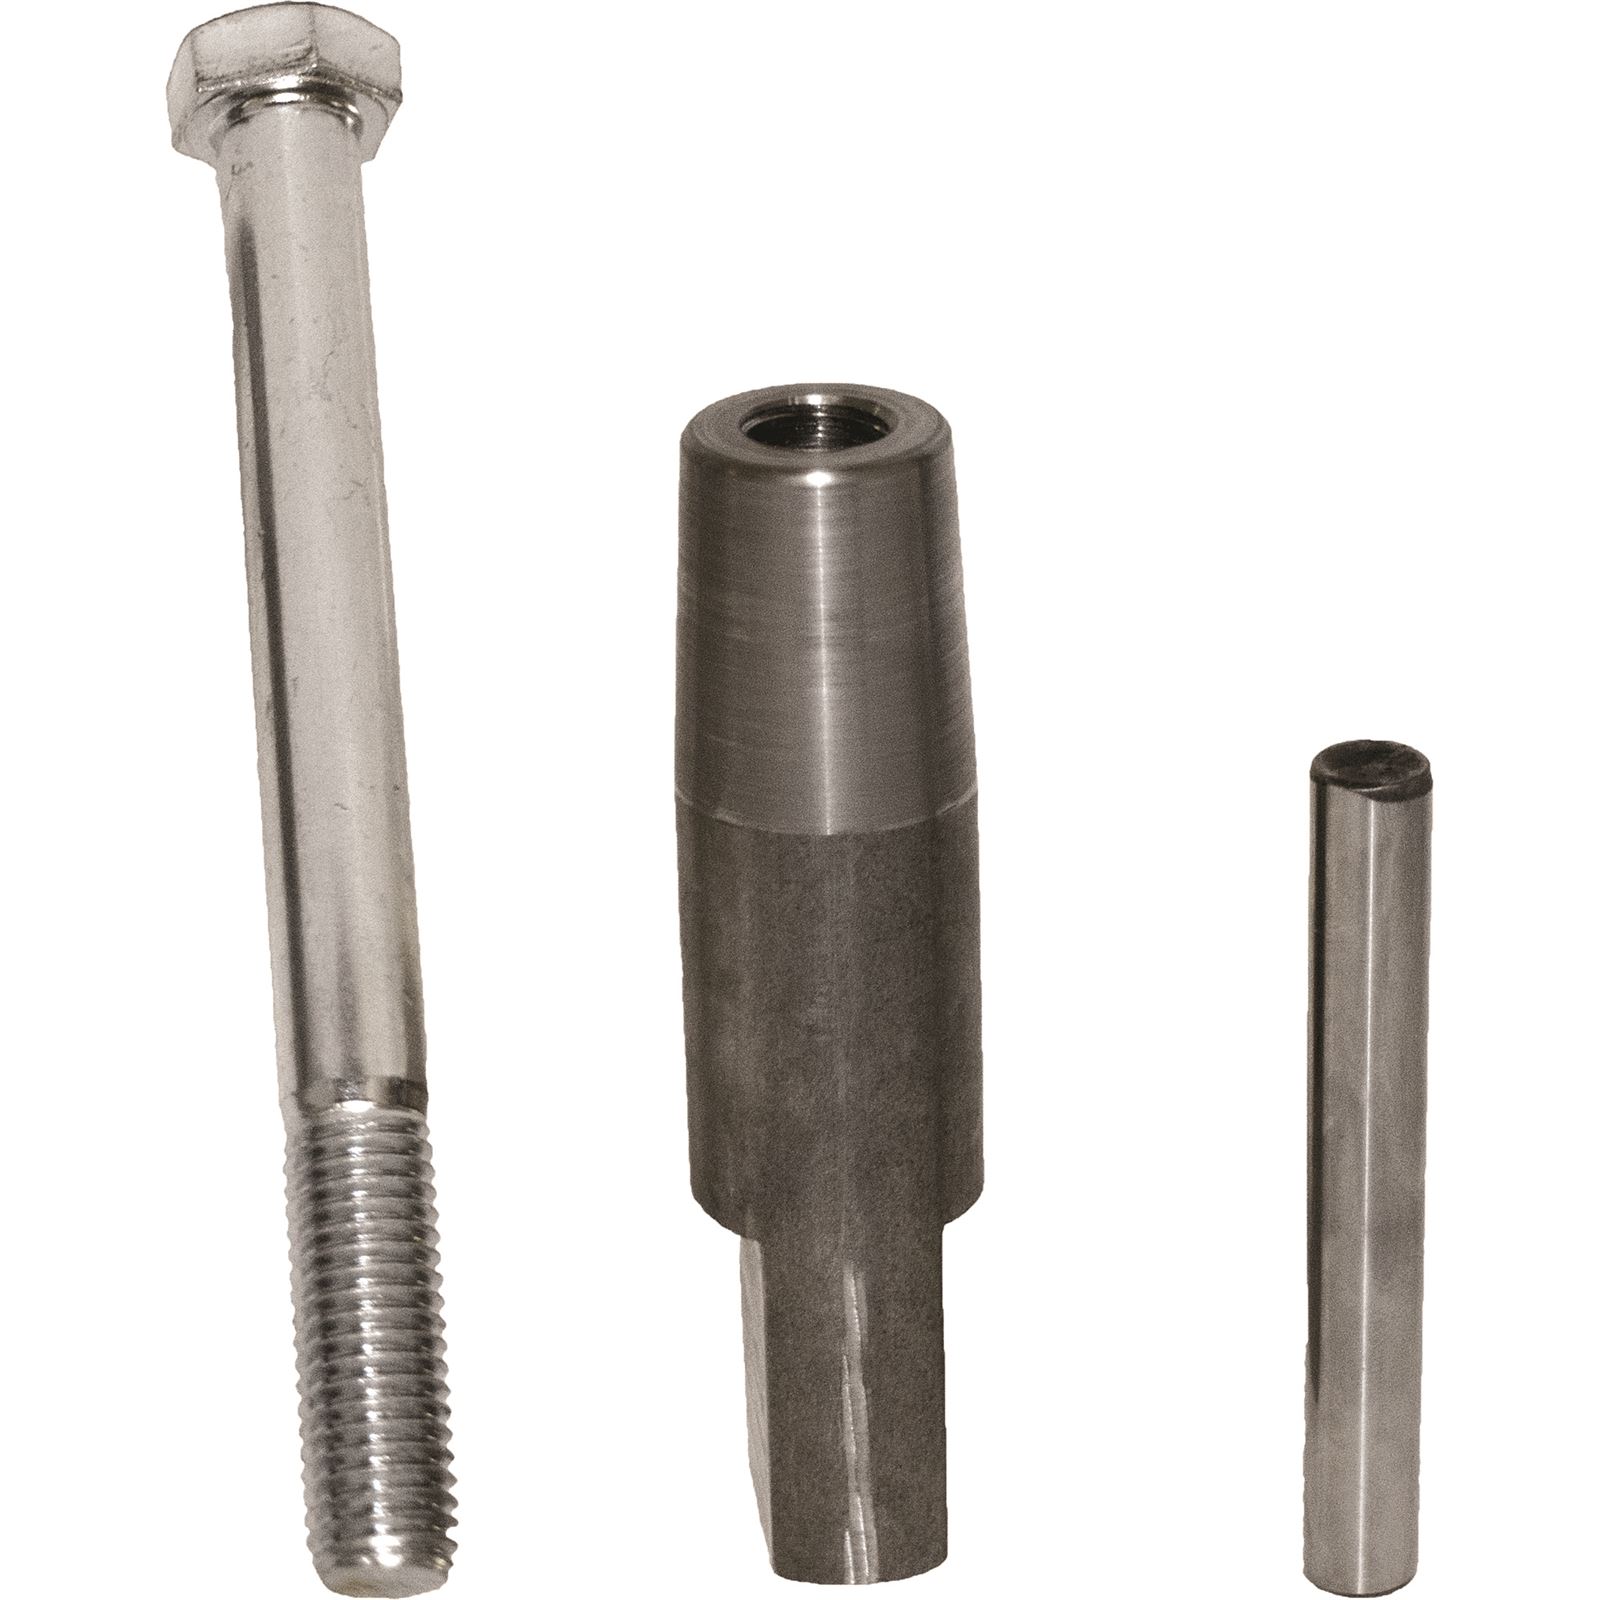 Starting Line Products Drive Clutch Taper Holding Tool